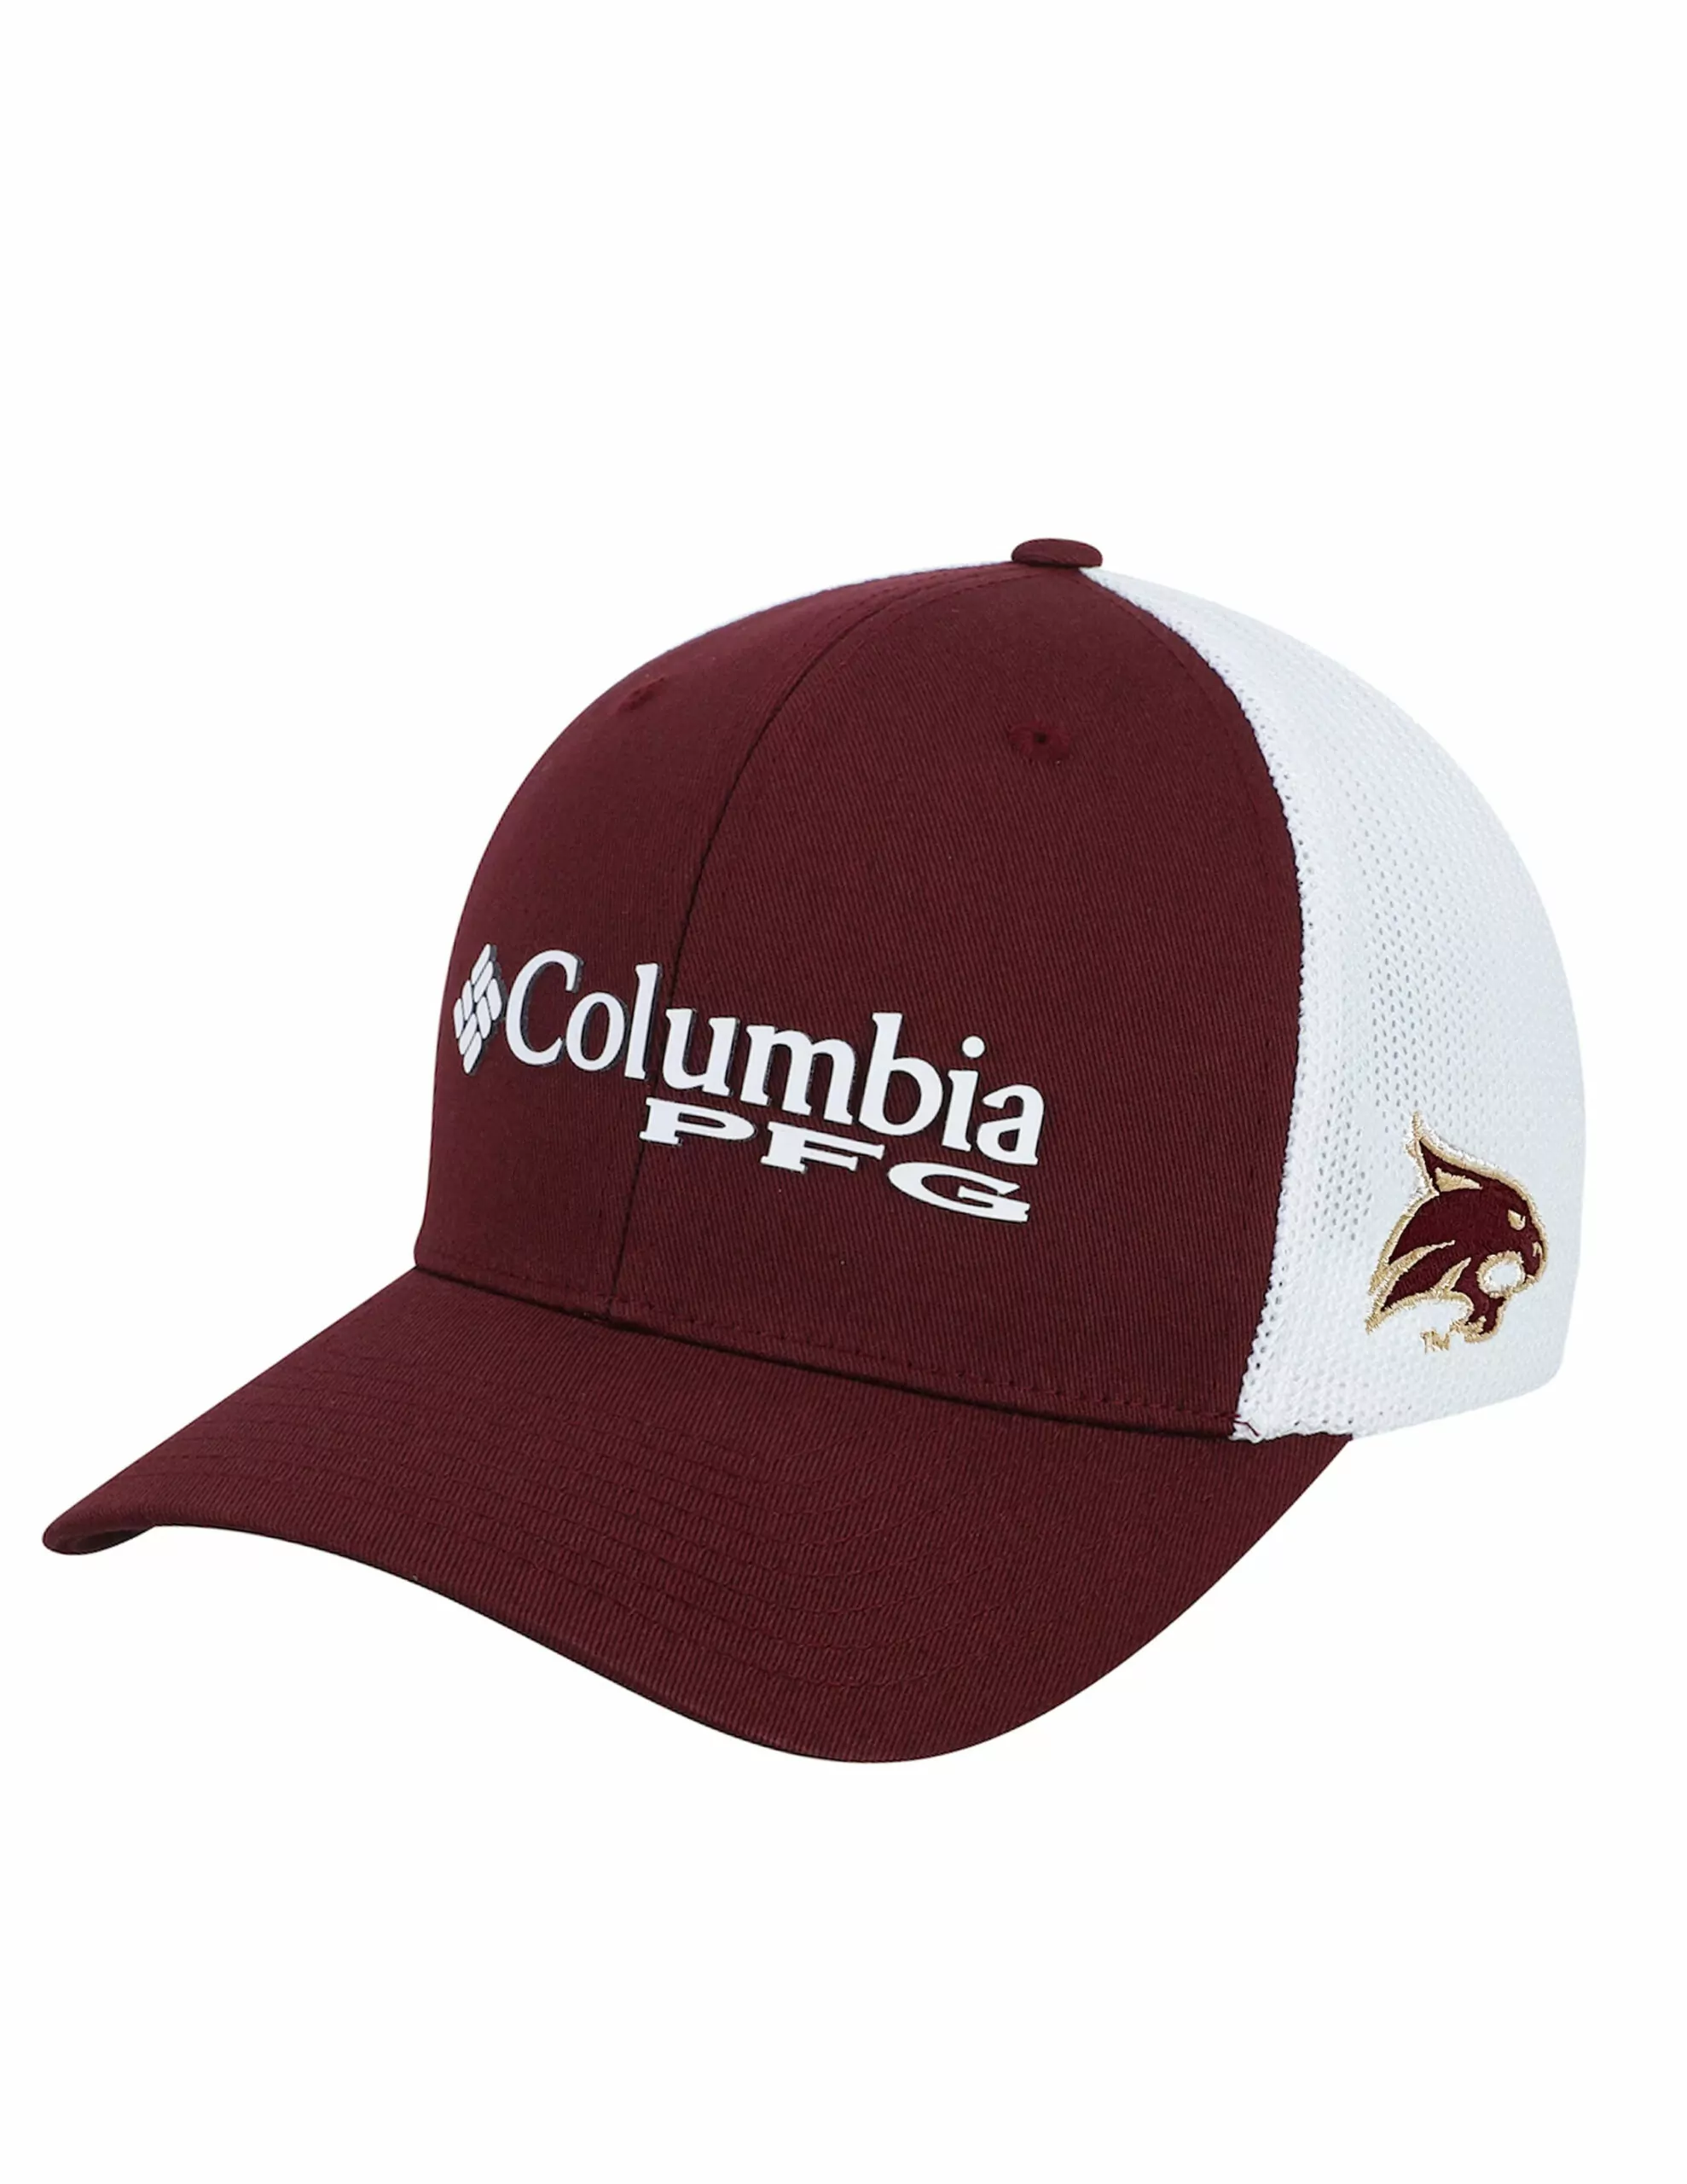 TXST PFG Cap - Barefoot Campus Outfitter